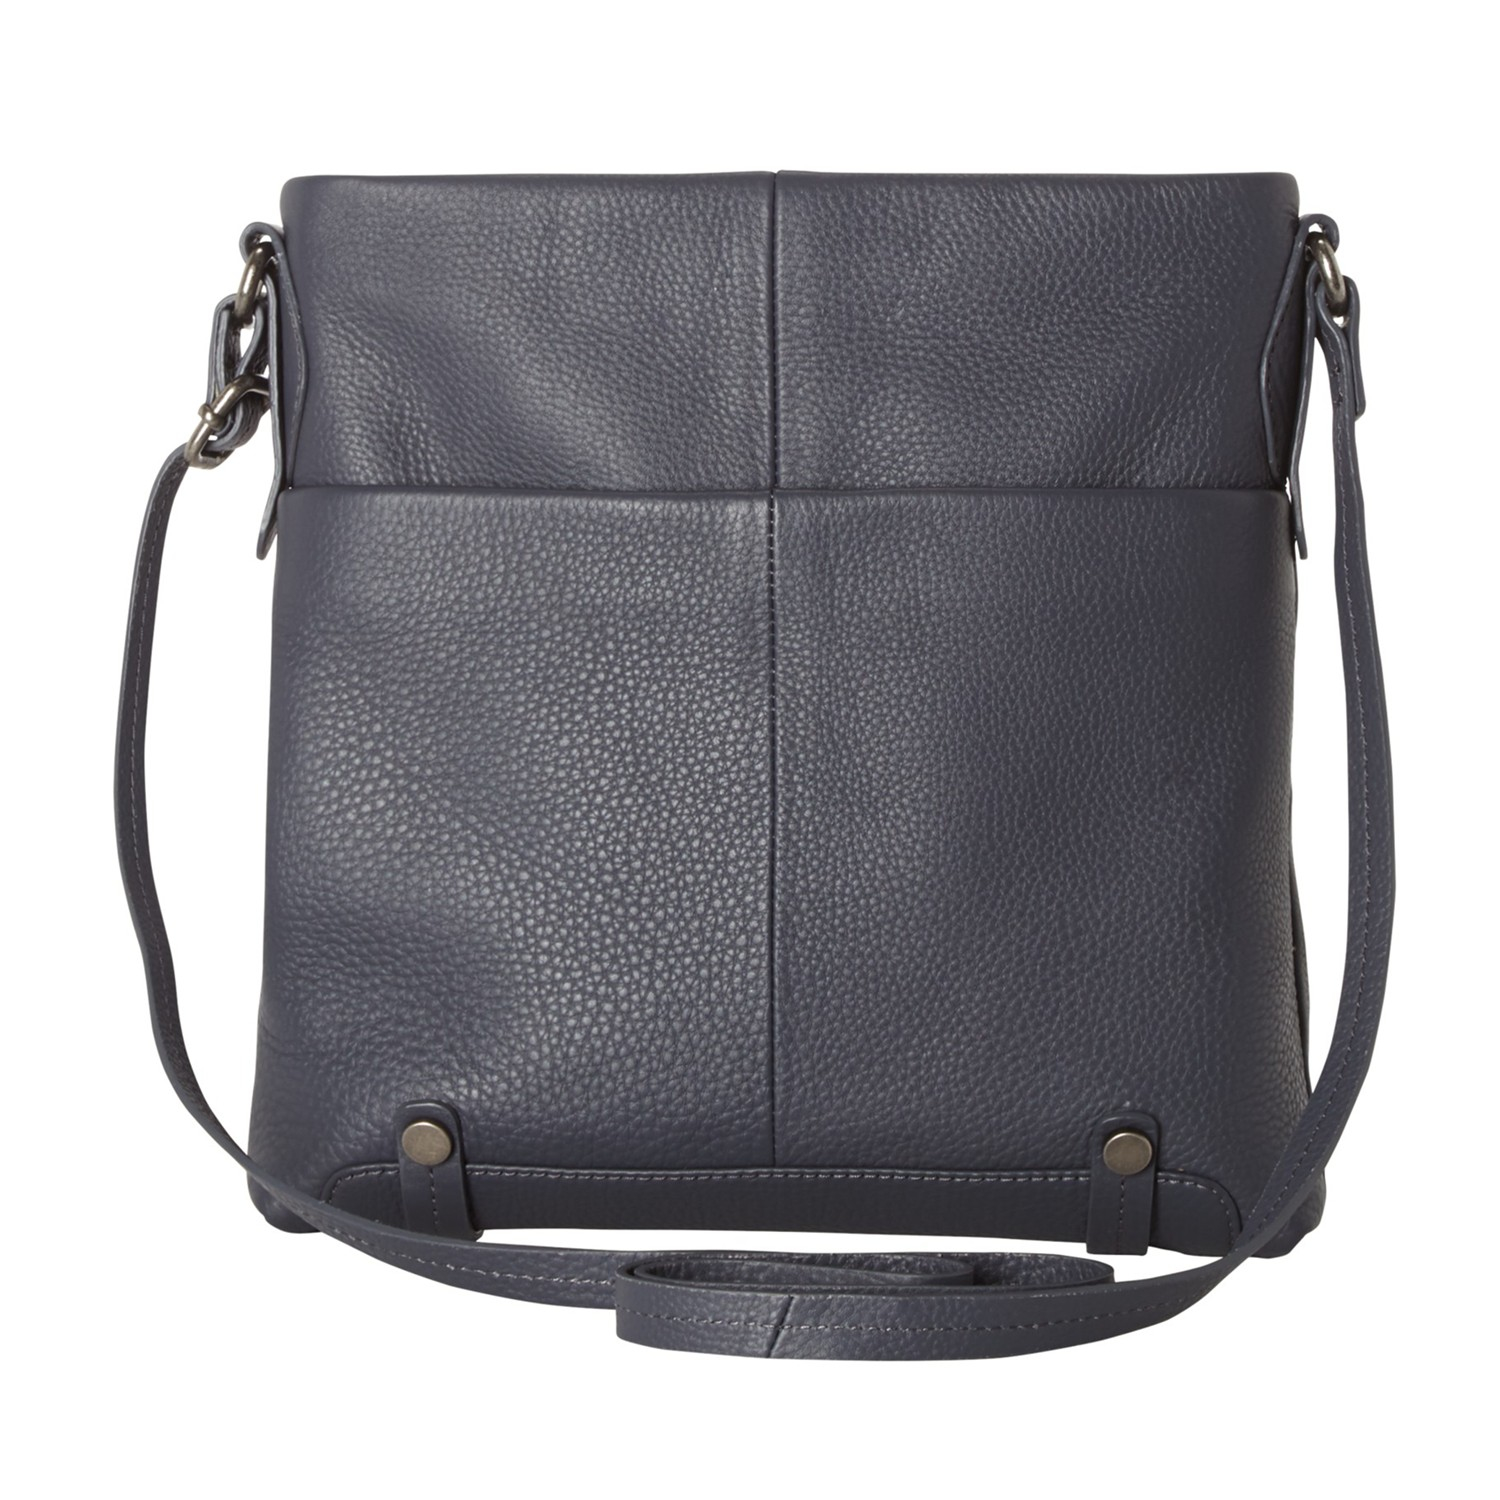 White Stuff Leather Nelly Cross Body Bag in Grey - Lyst